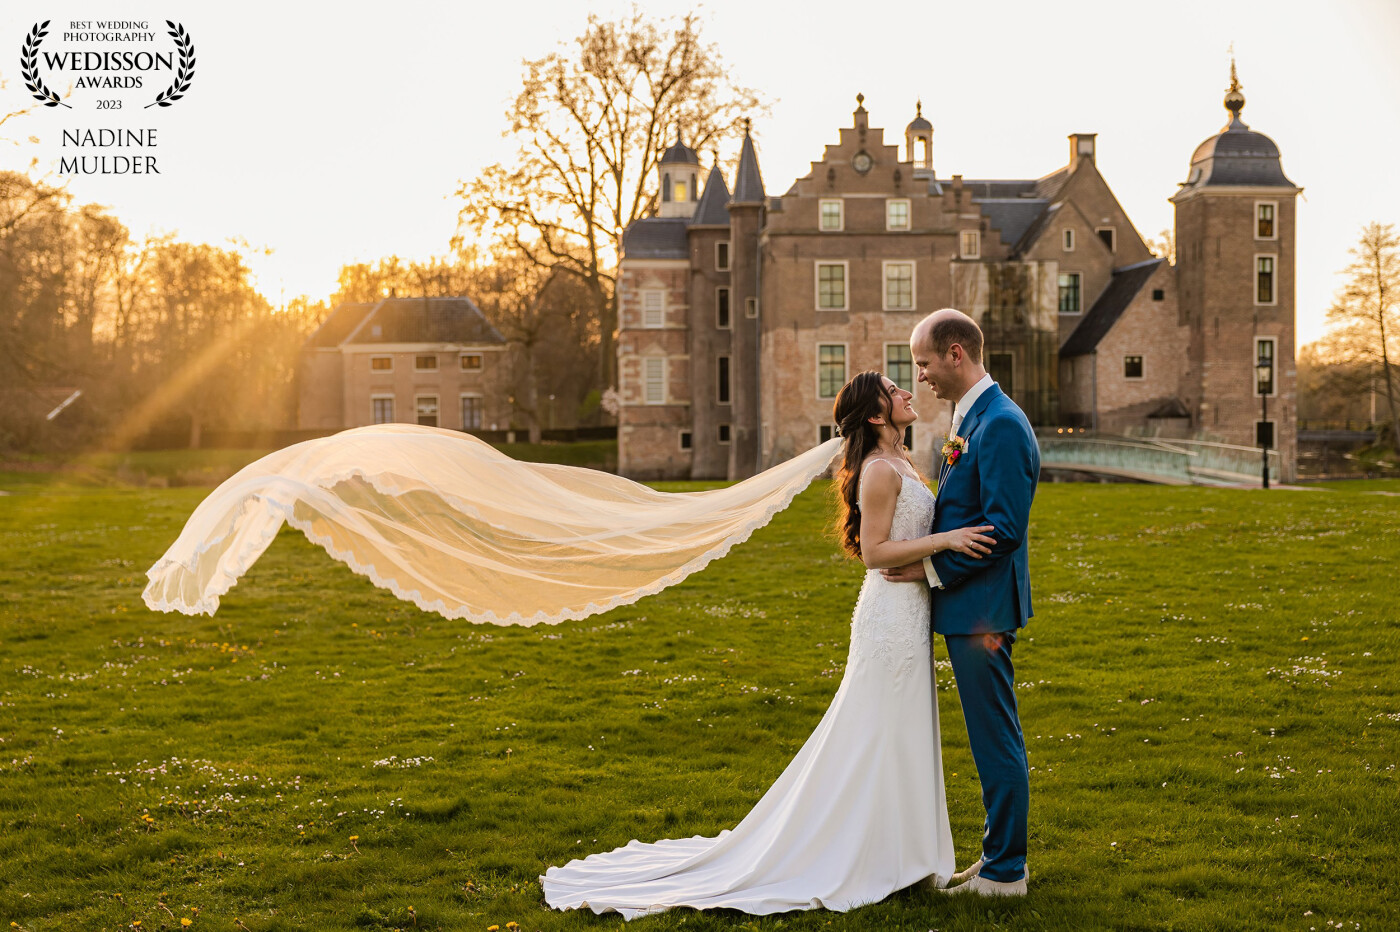 This was my first wedding of season 2023! It was mid April and the weather was amazing. When I saw this sunset I had to take this amazing couple outside!